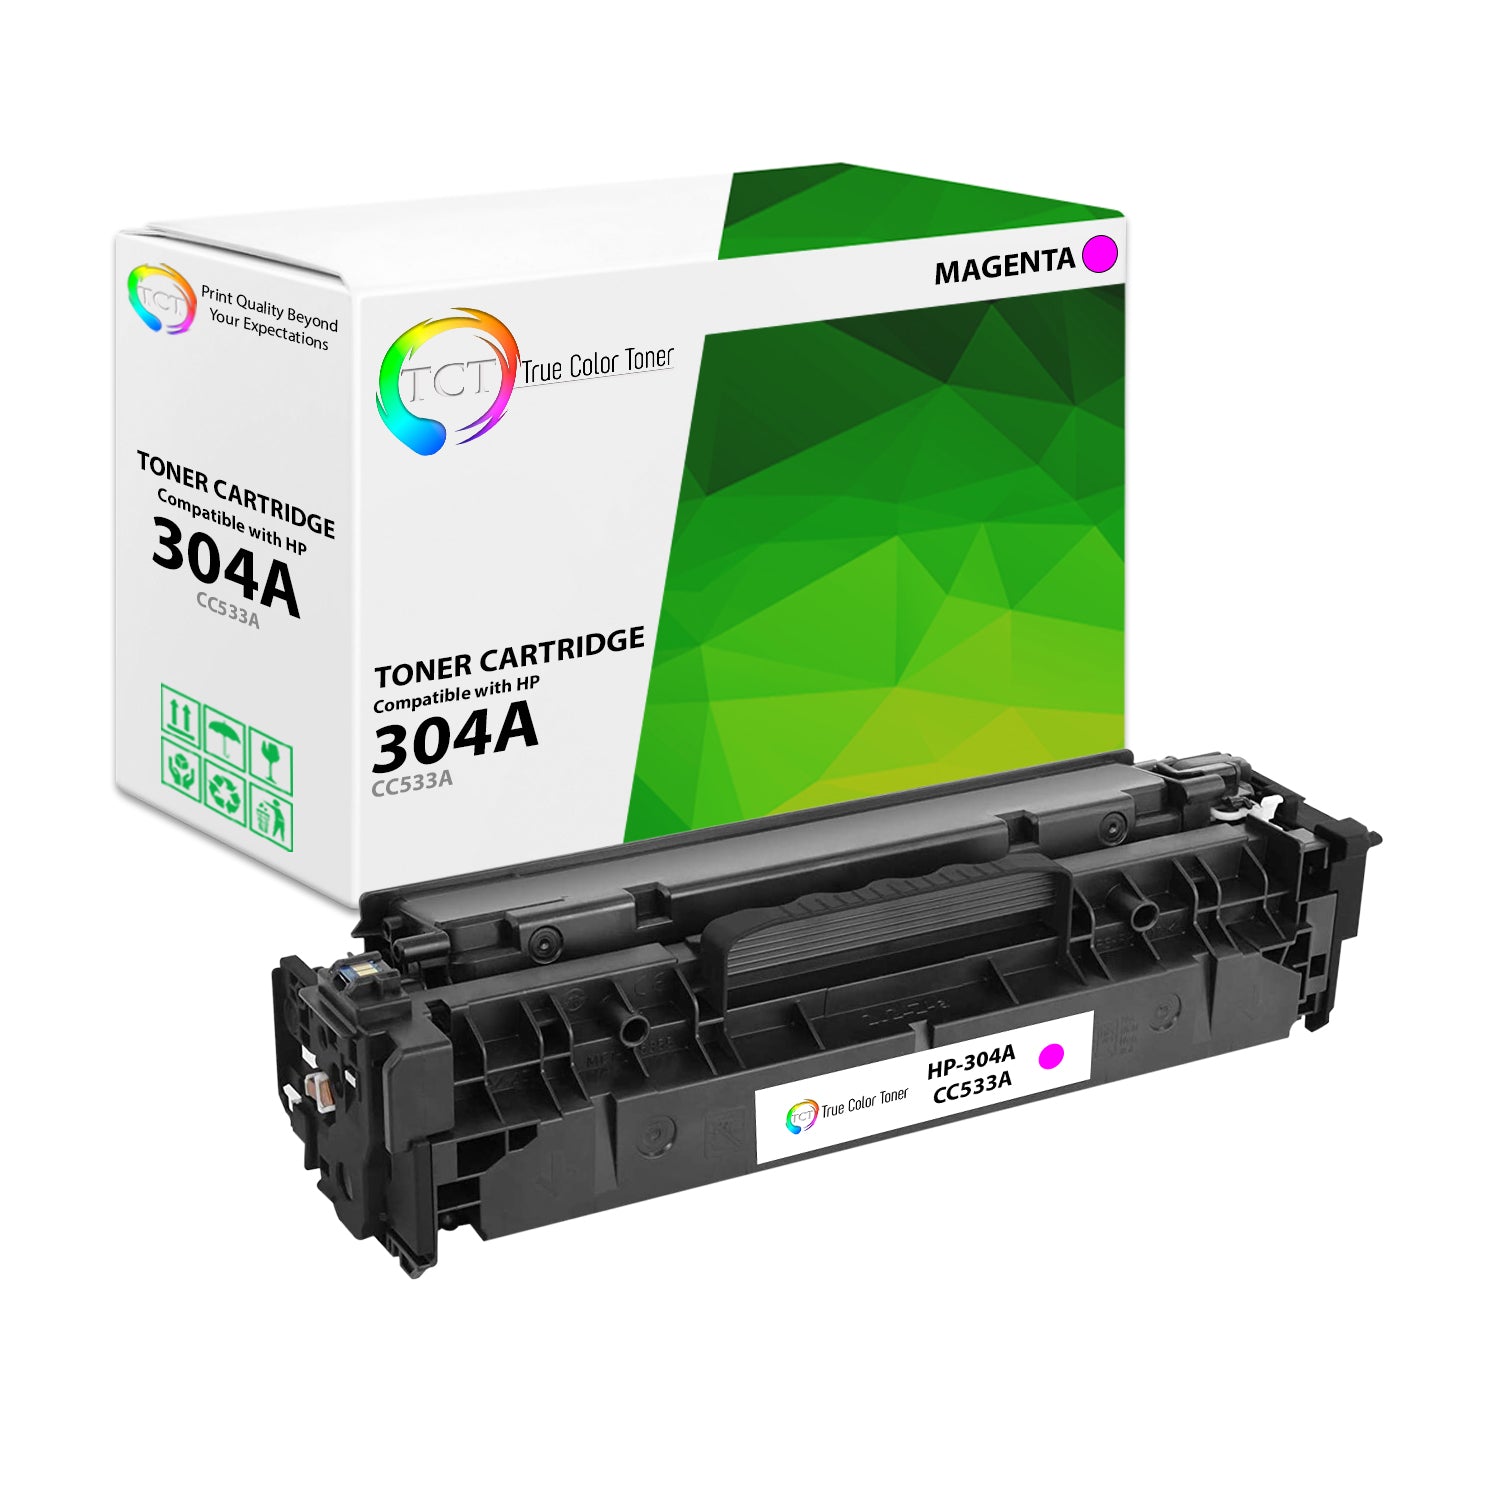 TCT Compatible Toner Cartridge Replacement for the HP 304A Series - 1 Pack Magenta